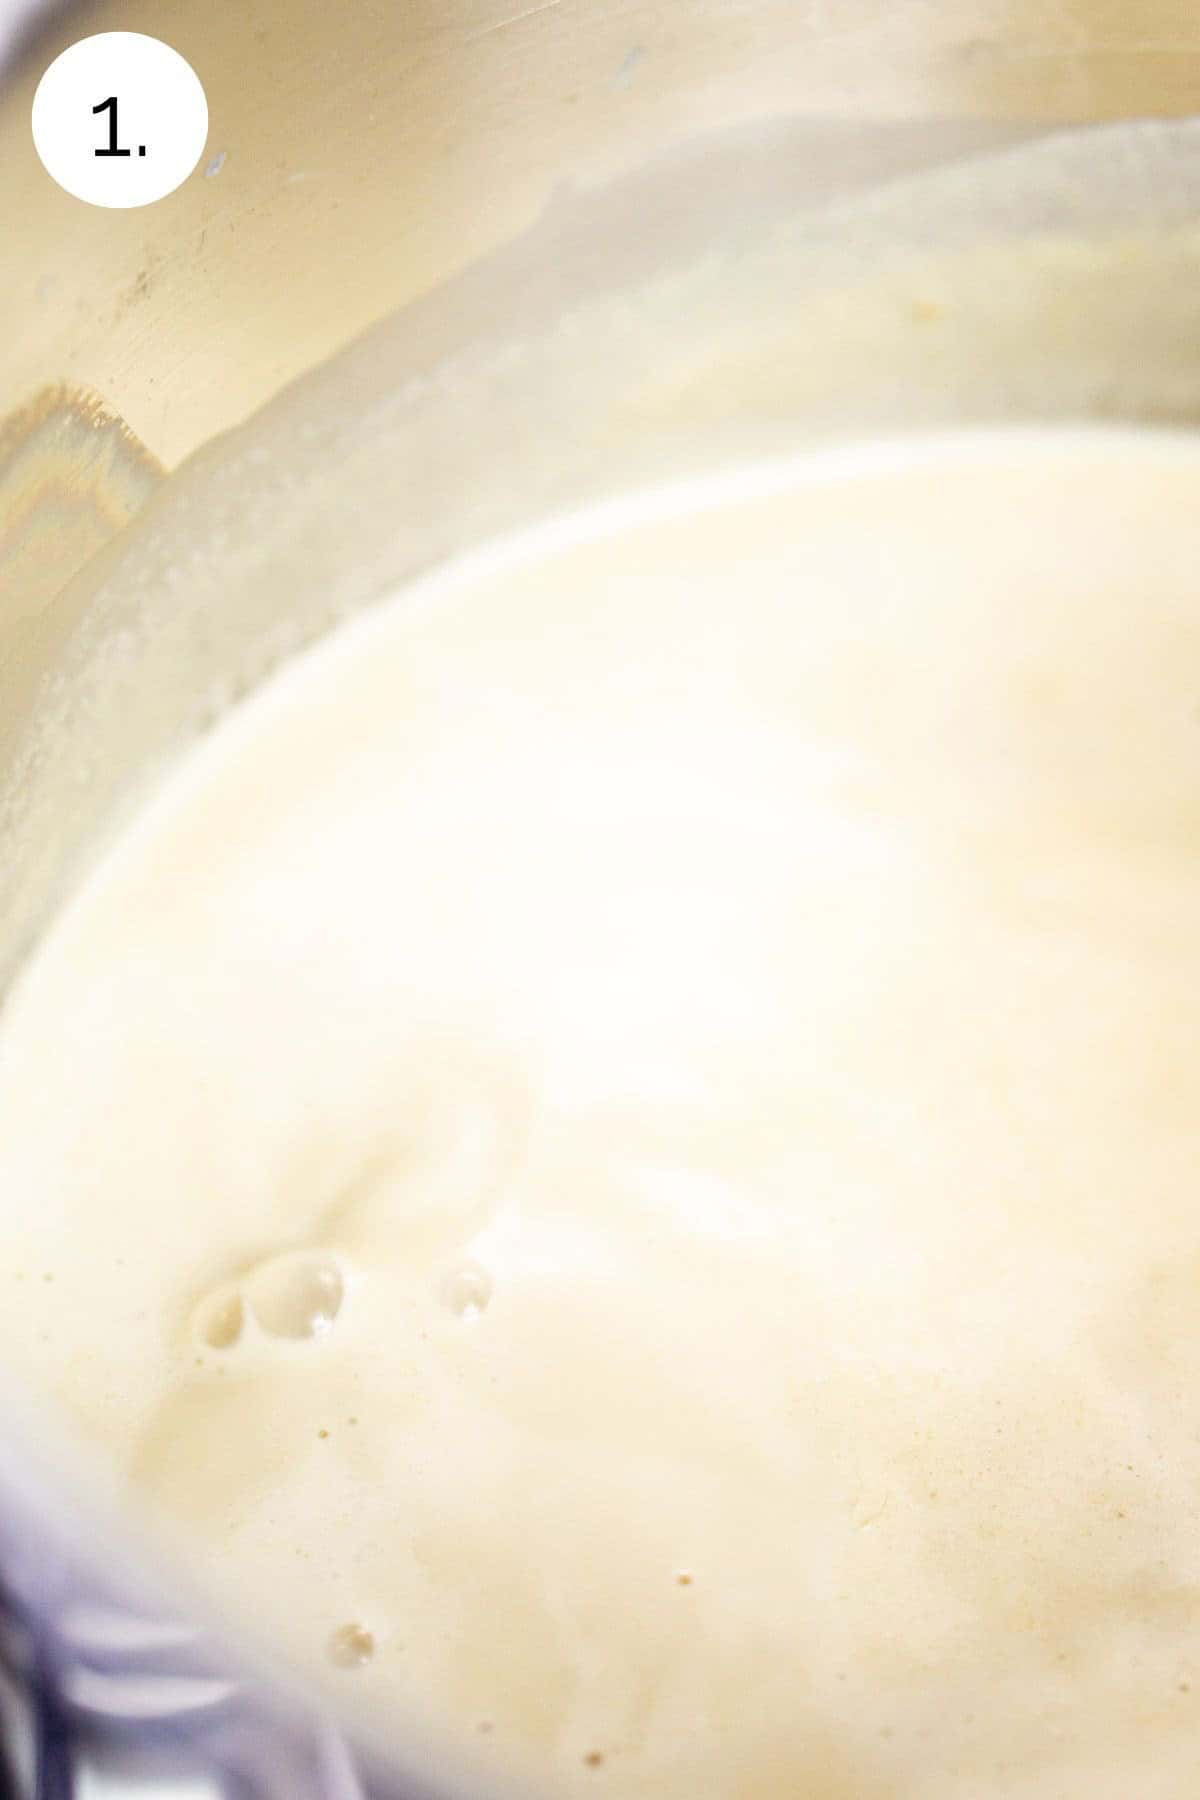 Simmering the milk, heavy cream and brown sugar in a medium saucepan on the stove.